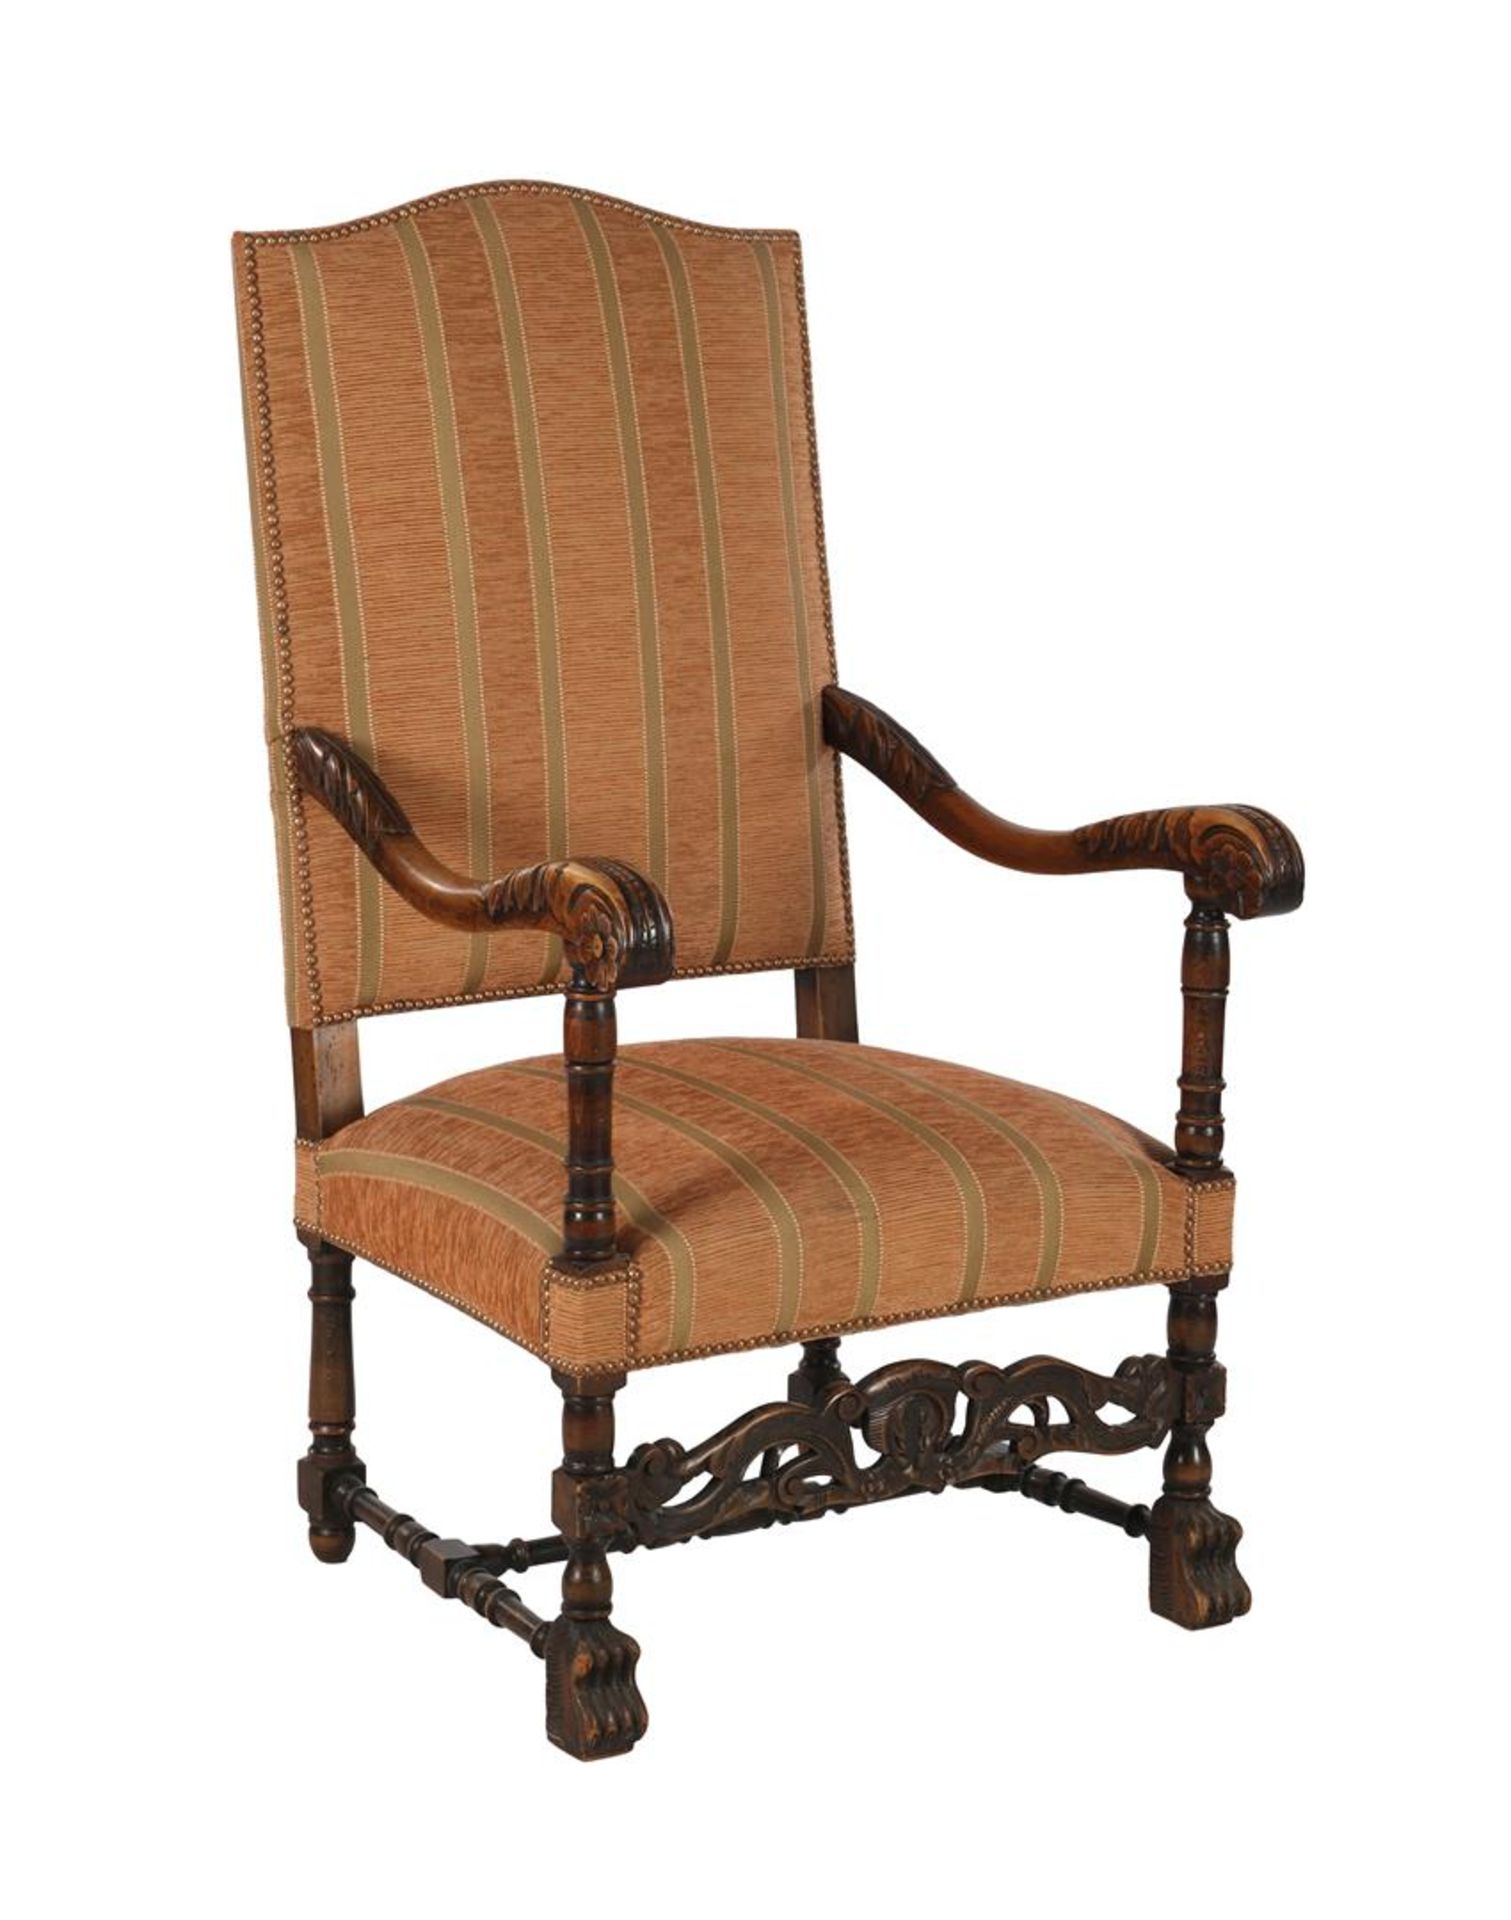 Richly decorated oak armchair with striped upholstery